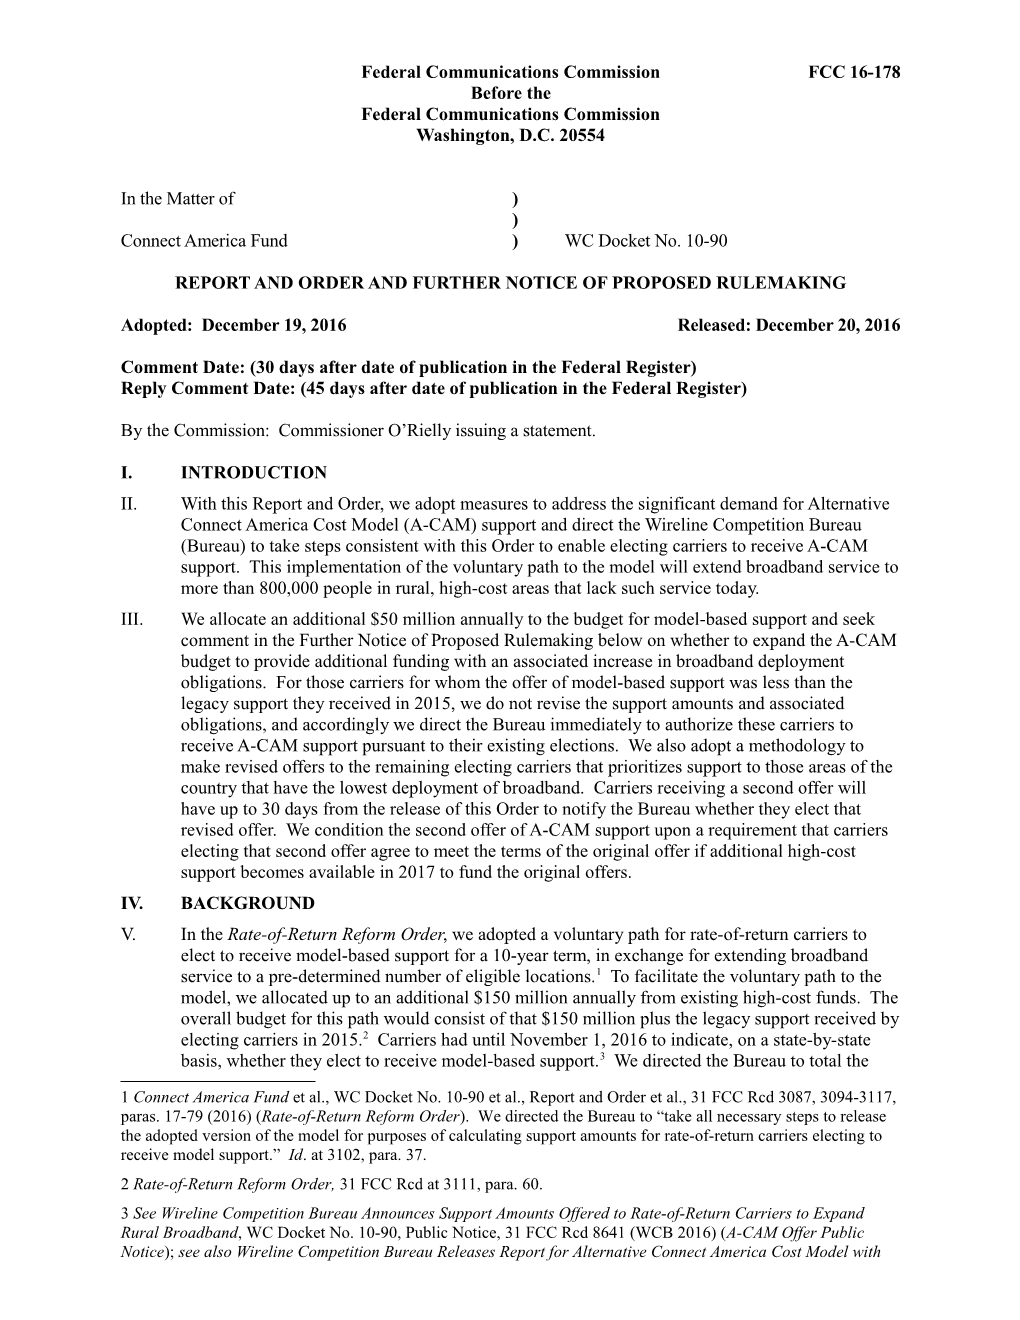 Report and Order and Further Notice of Proposed Rulemaking